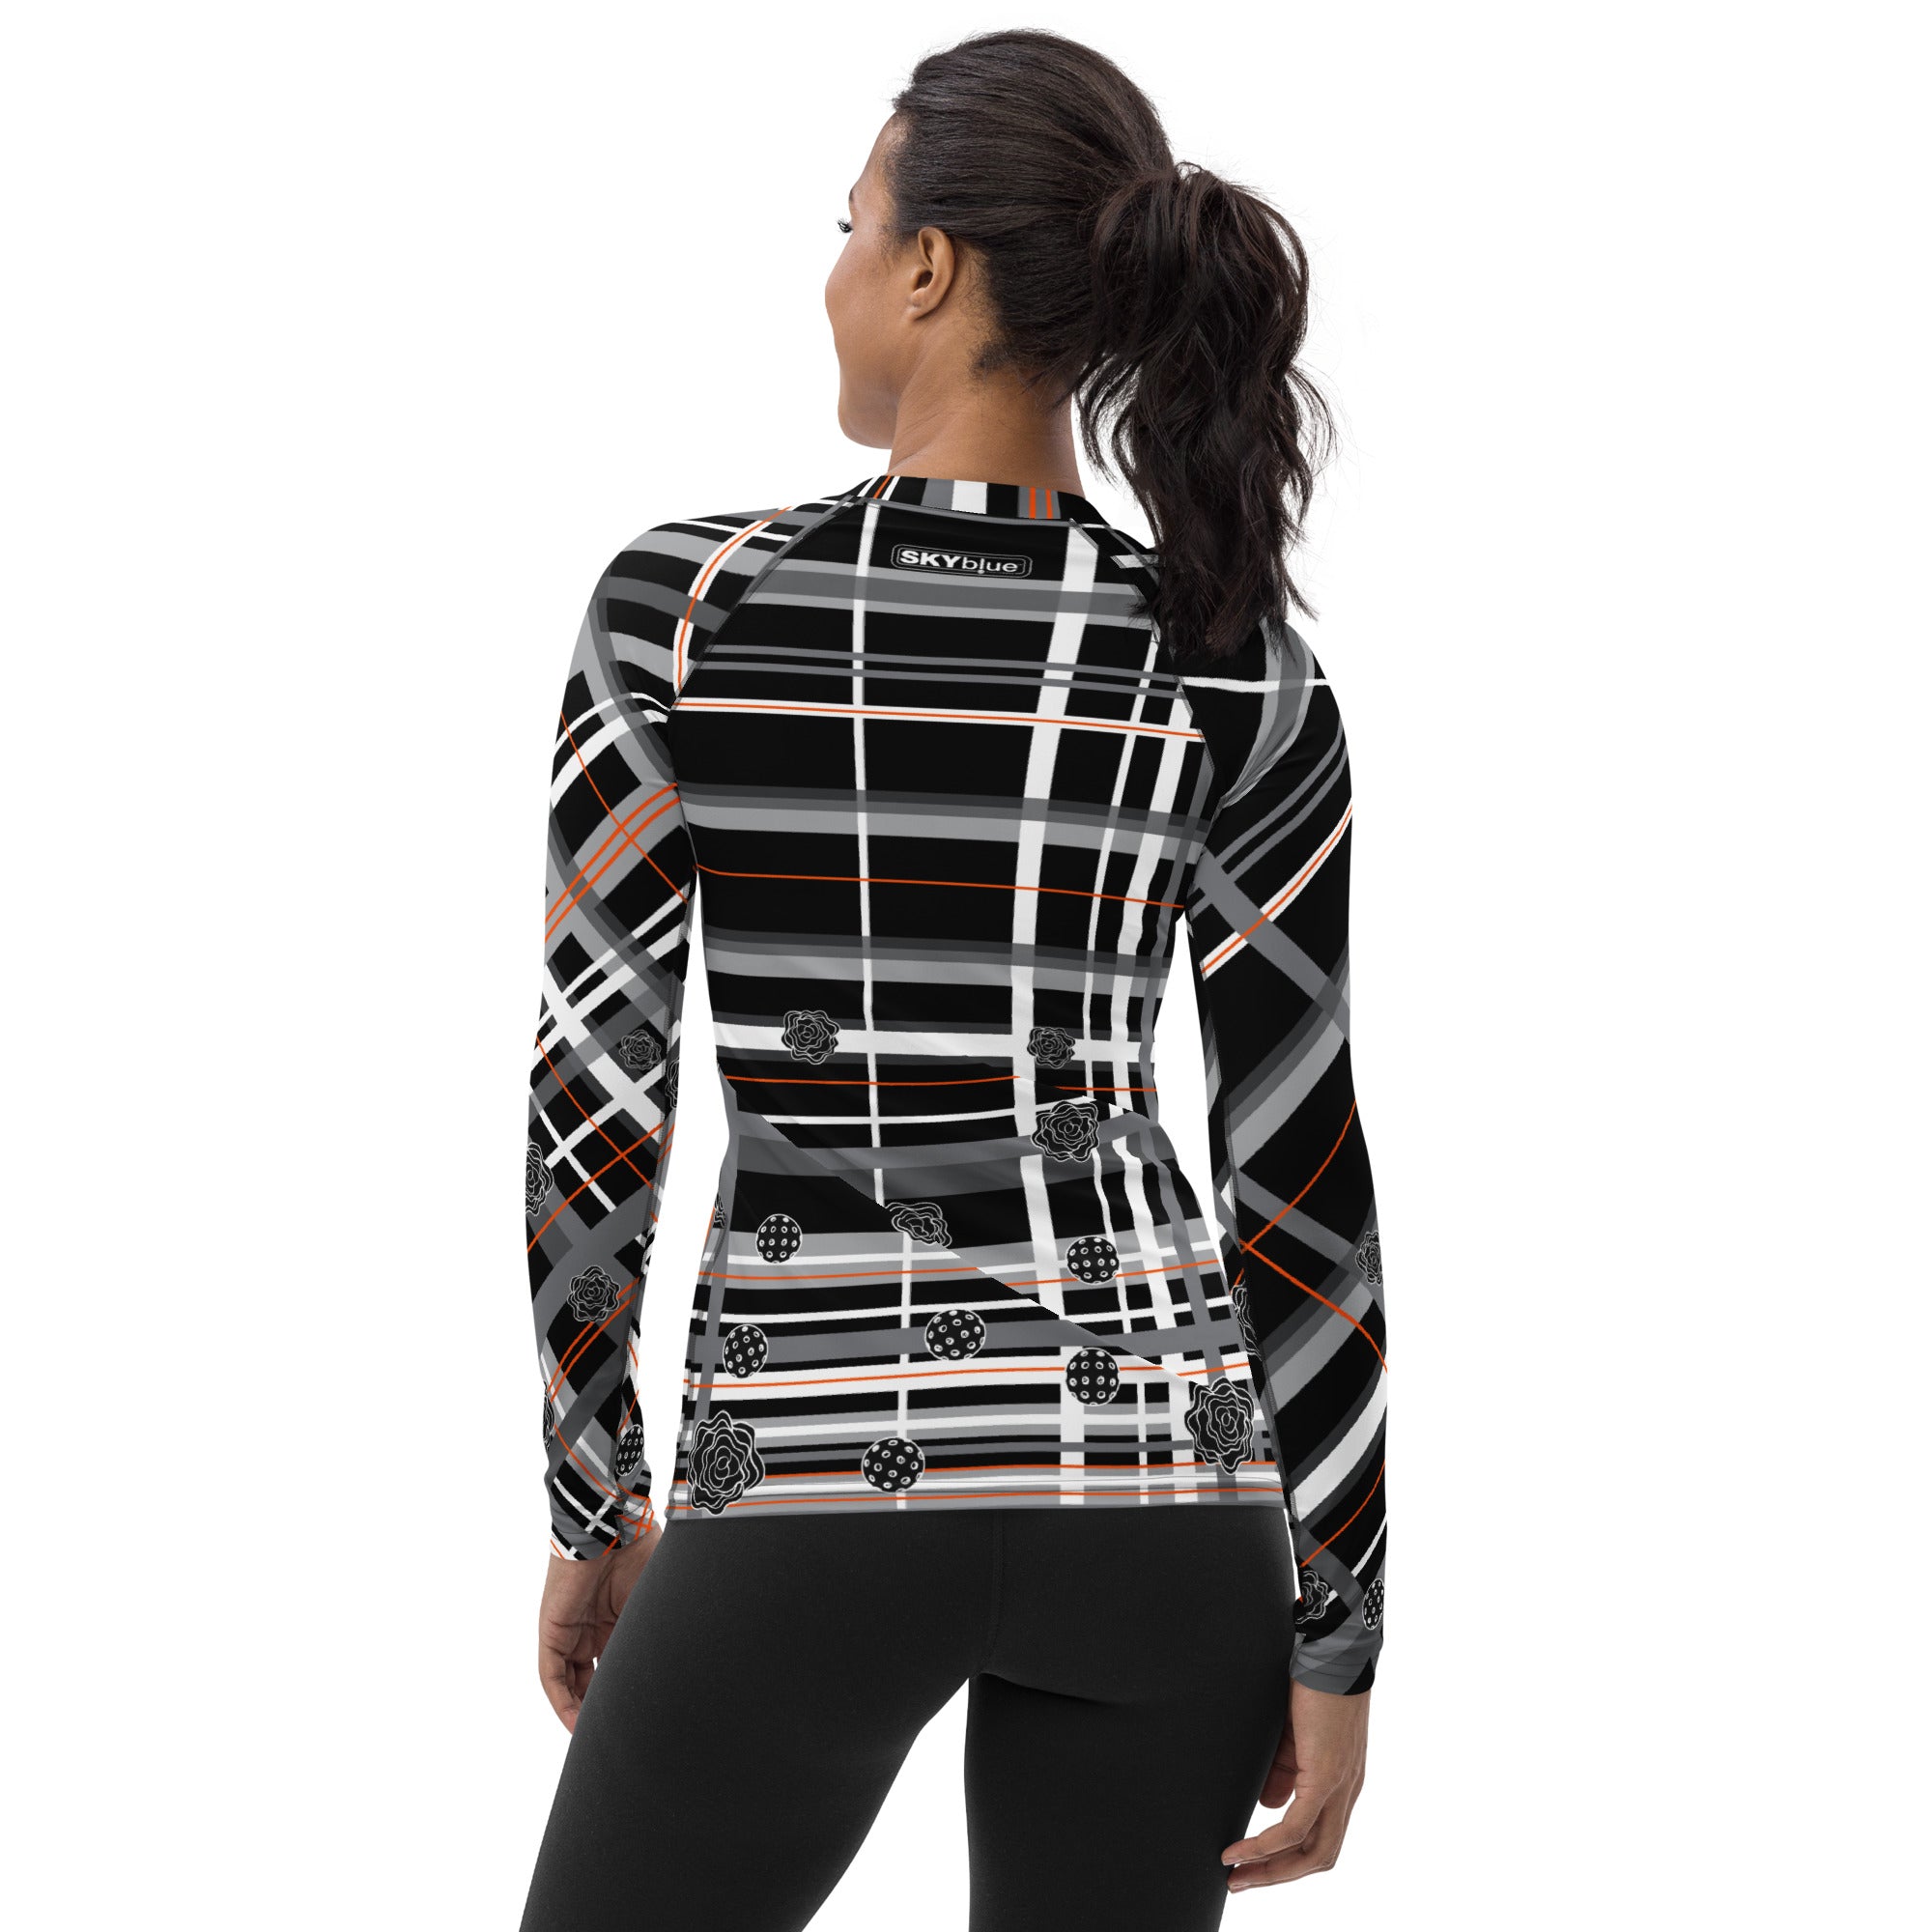 Got Pla(yed)id© Black, Tangelo & 15 Shades of Gray Women's Performance Long Sleeve Shirt for Pickleball Enthusiasts, UPF 50+